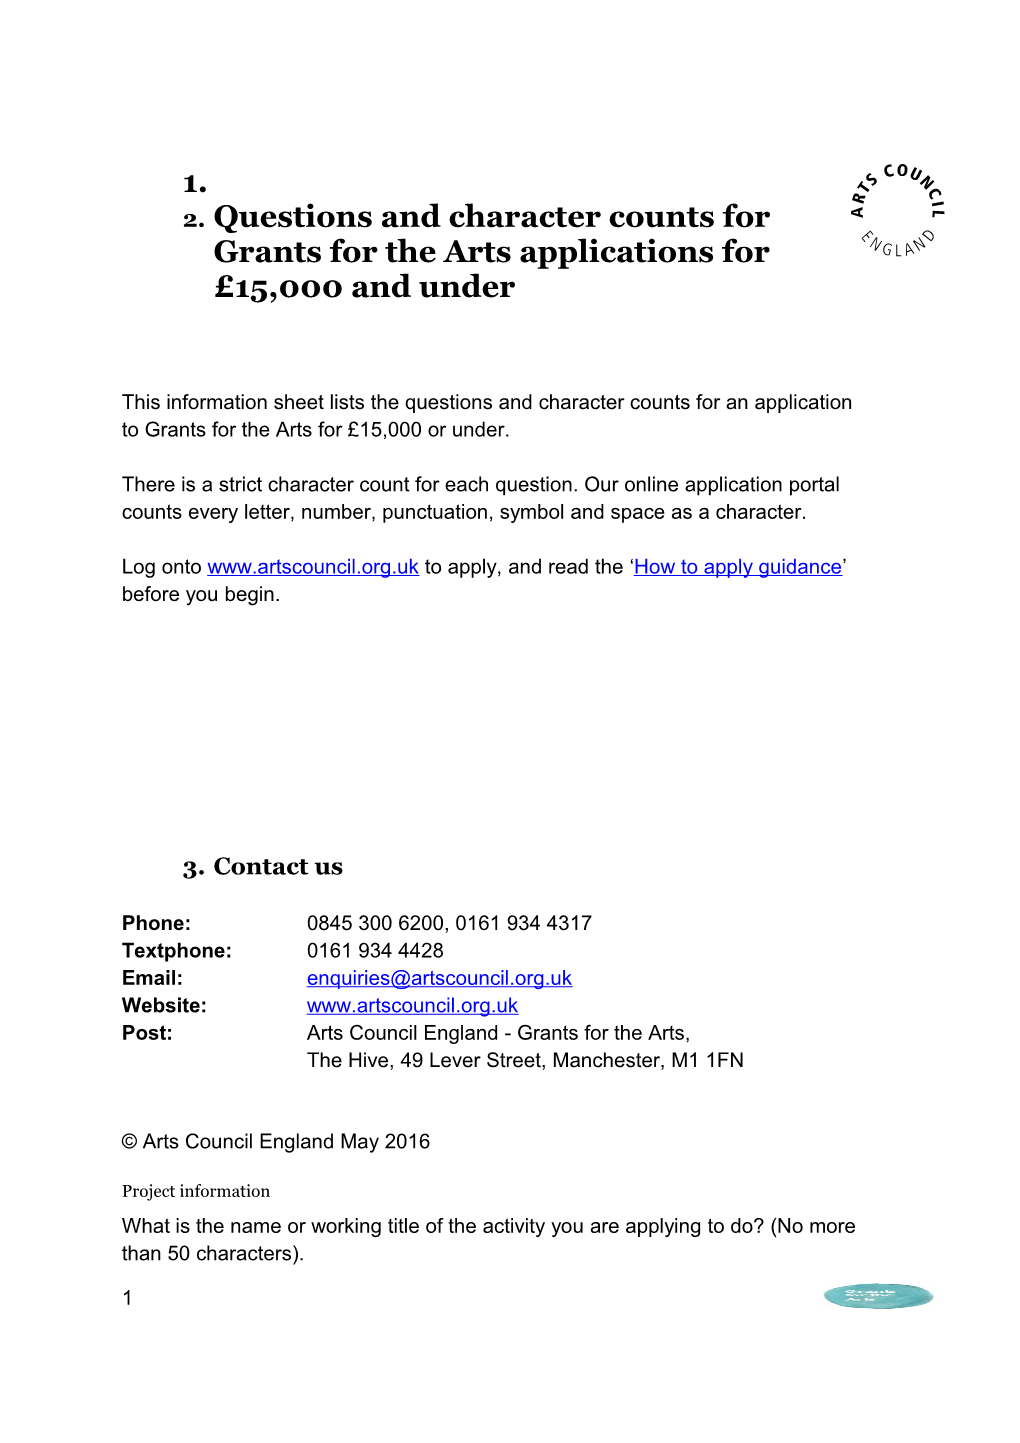 Questions and Character Counts for Grants for the Arts Applications for 15,000 and Under